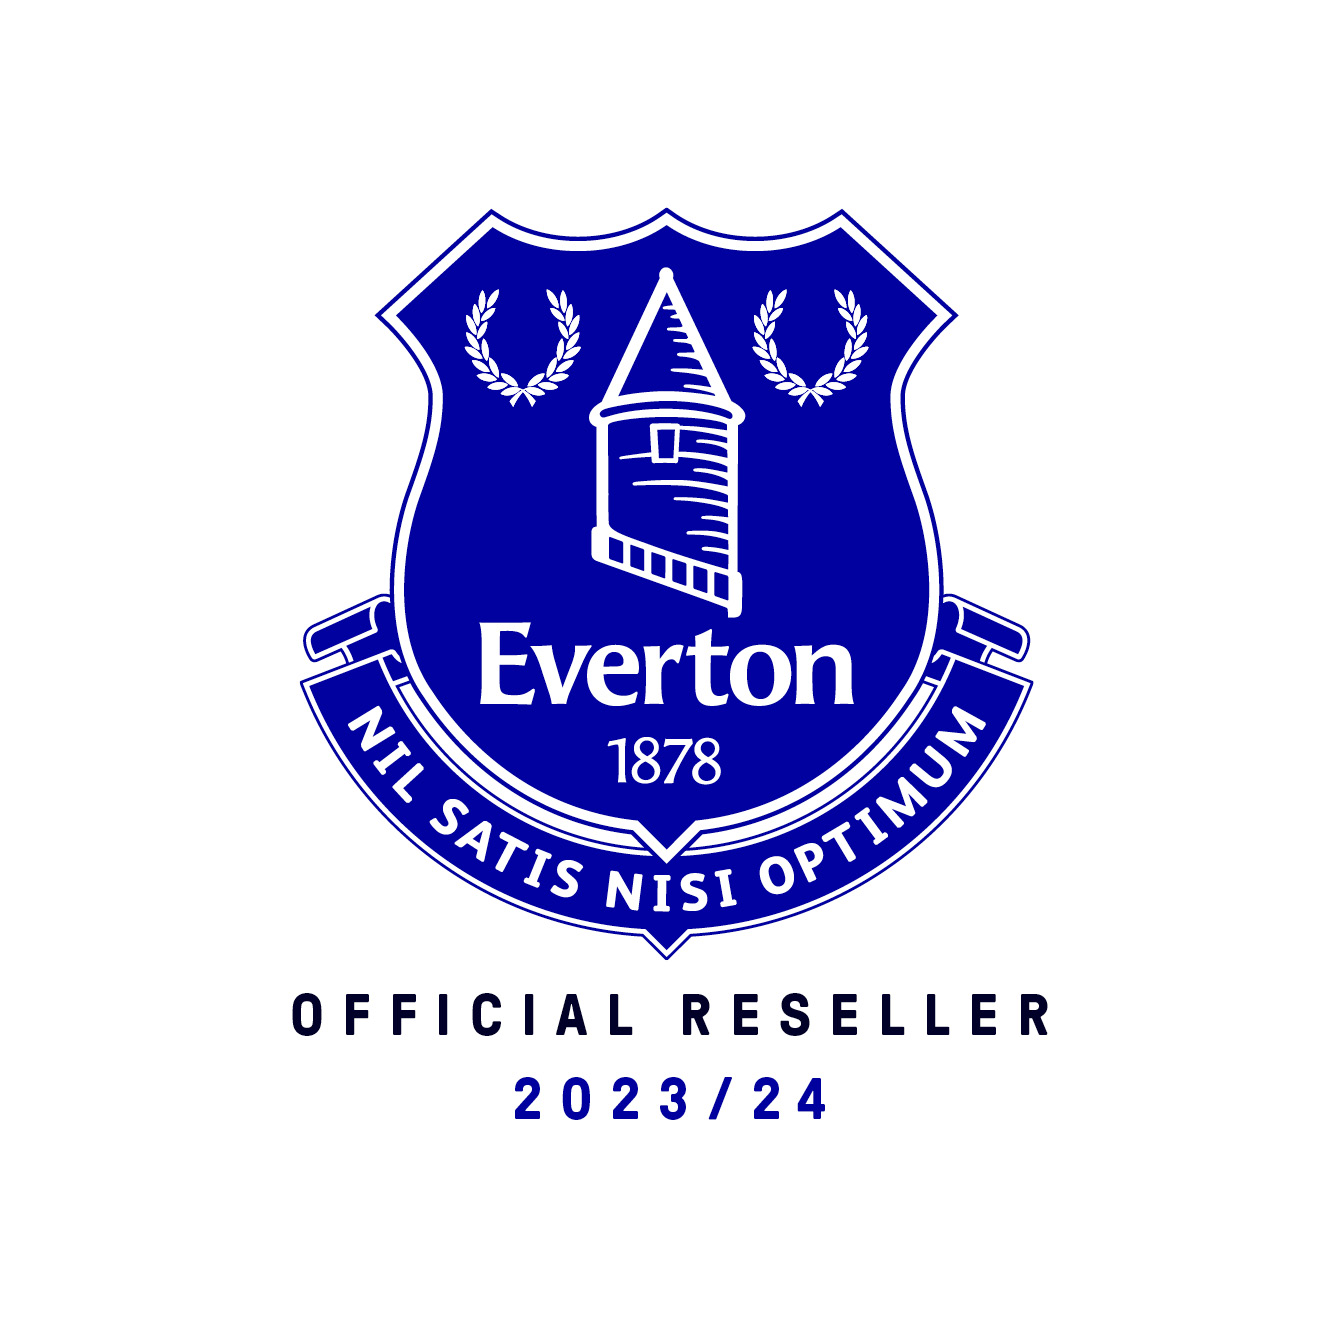 Everton FC Official Reseller